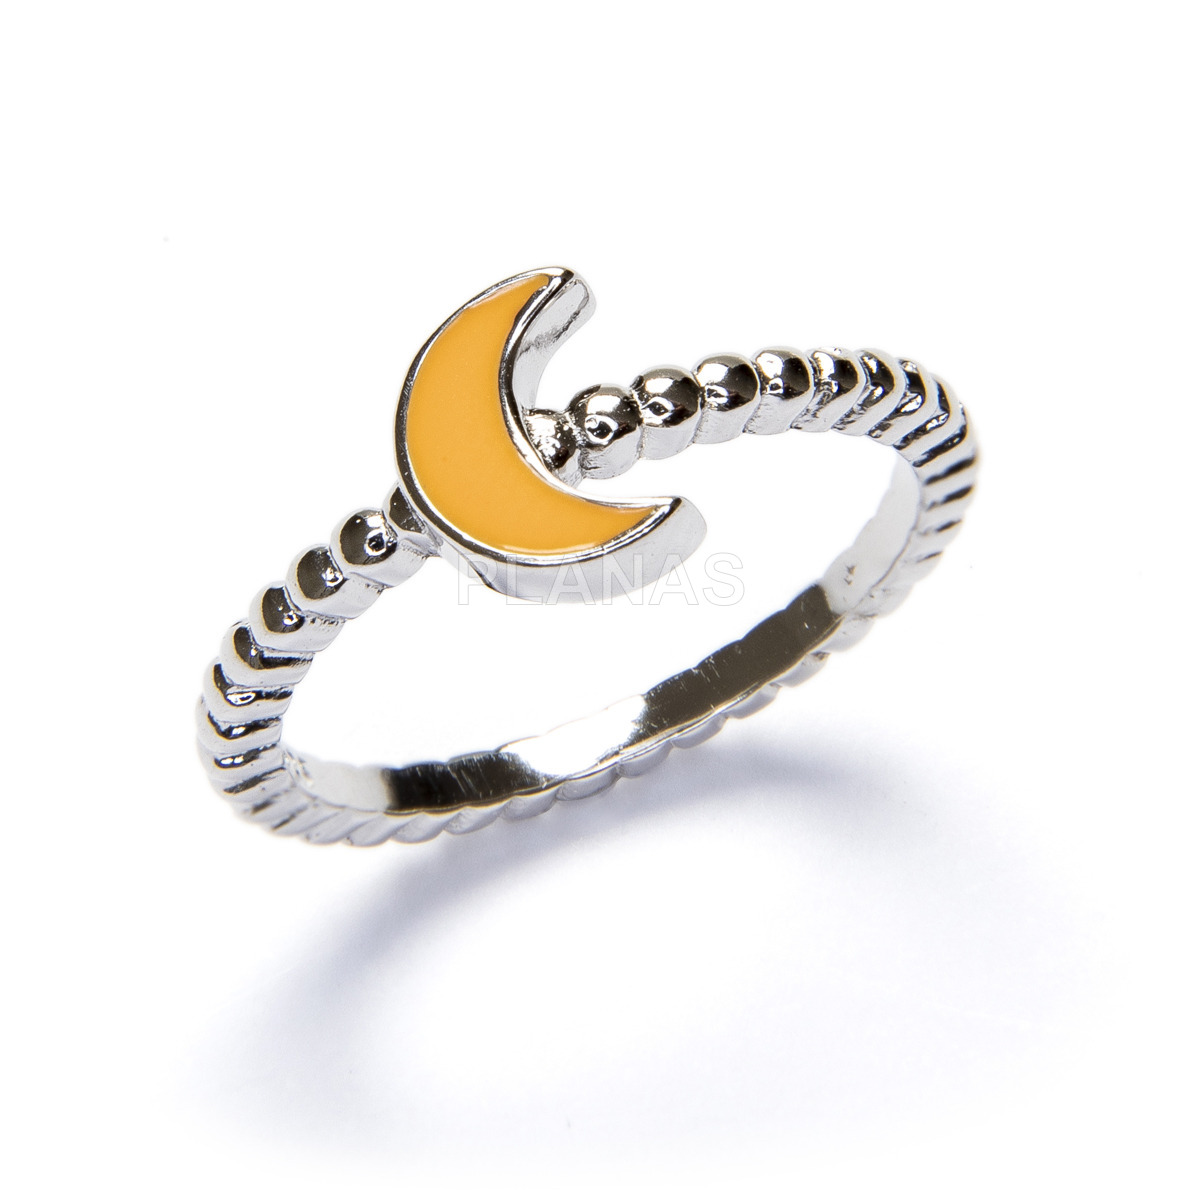 Ring in rhodium plated sterling silver and enamel.luna.